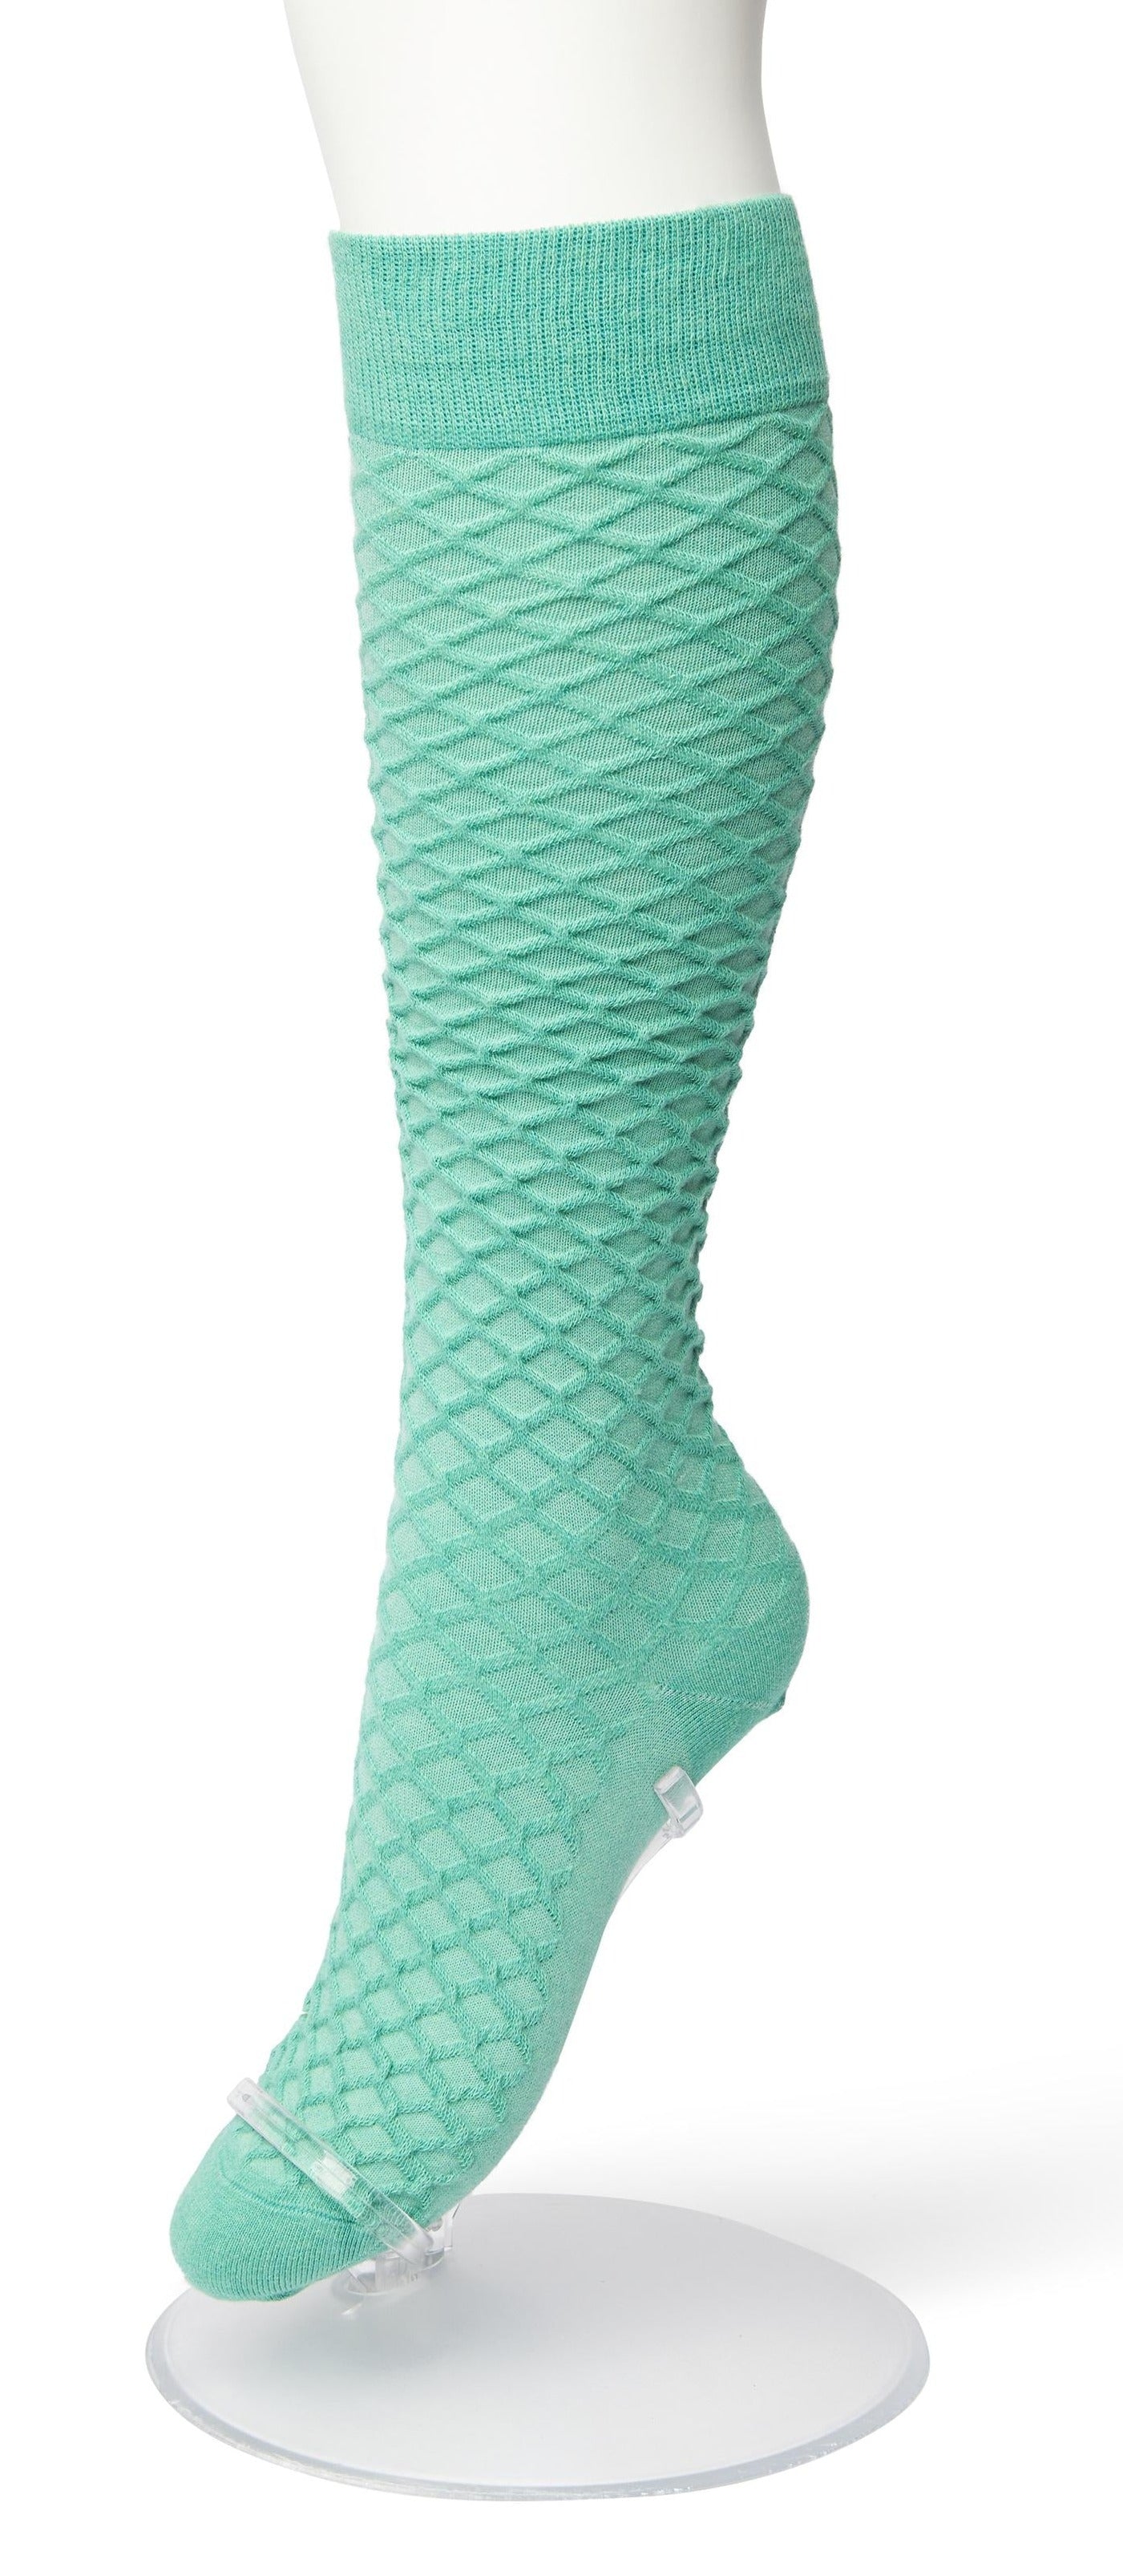 Bonnie Doon BP211506 Cable Knee-highs - Mint Green (malachite) soft and warm knitted knee-high socks with a criss-cross diamond textured pattern